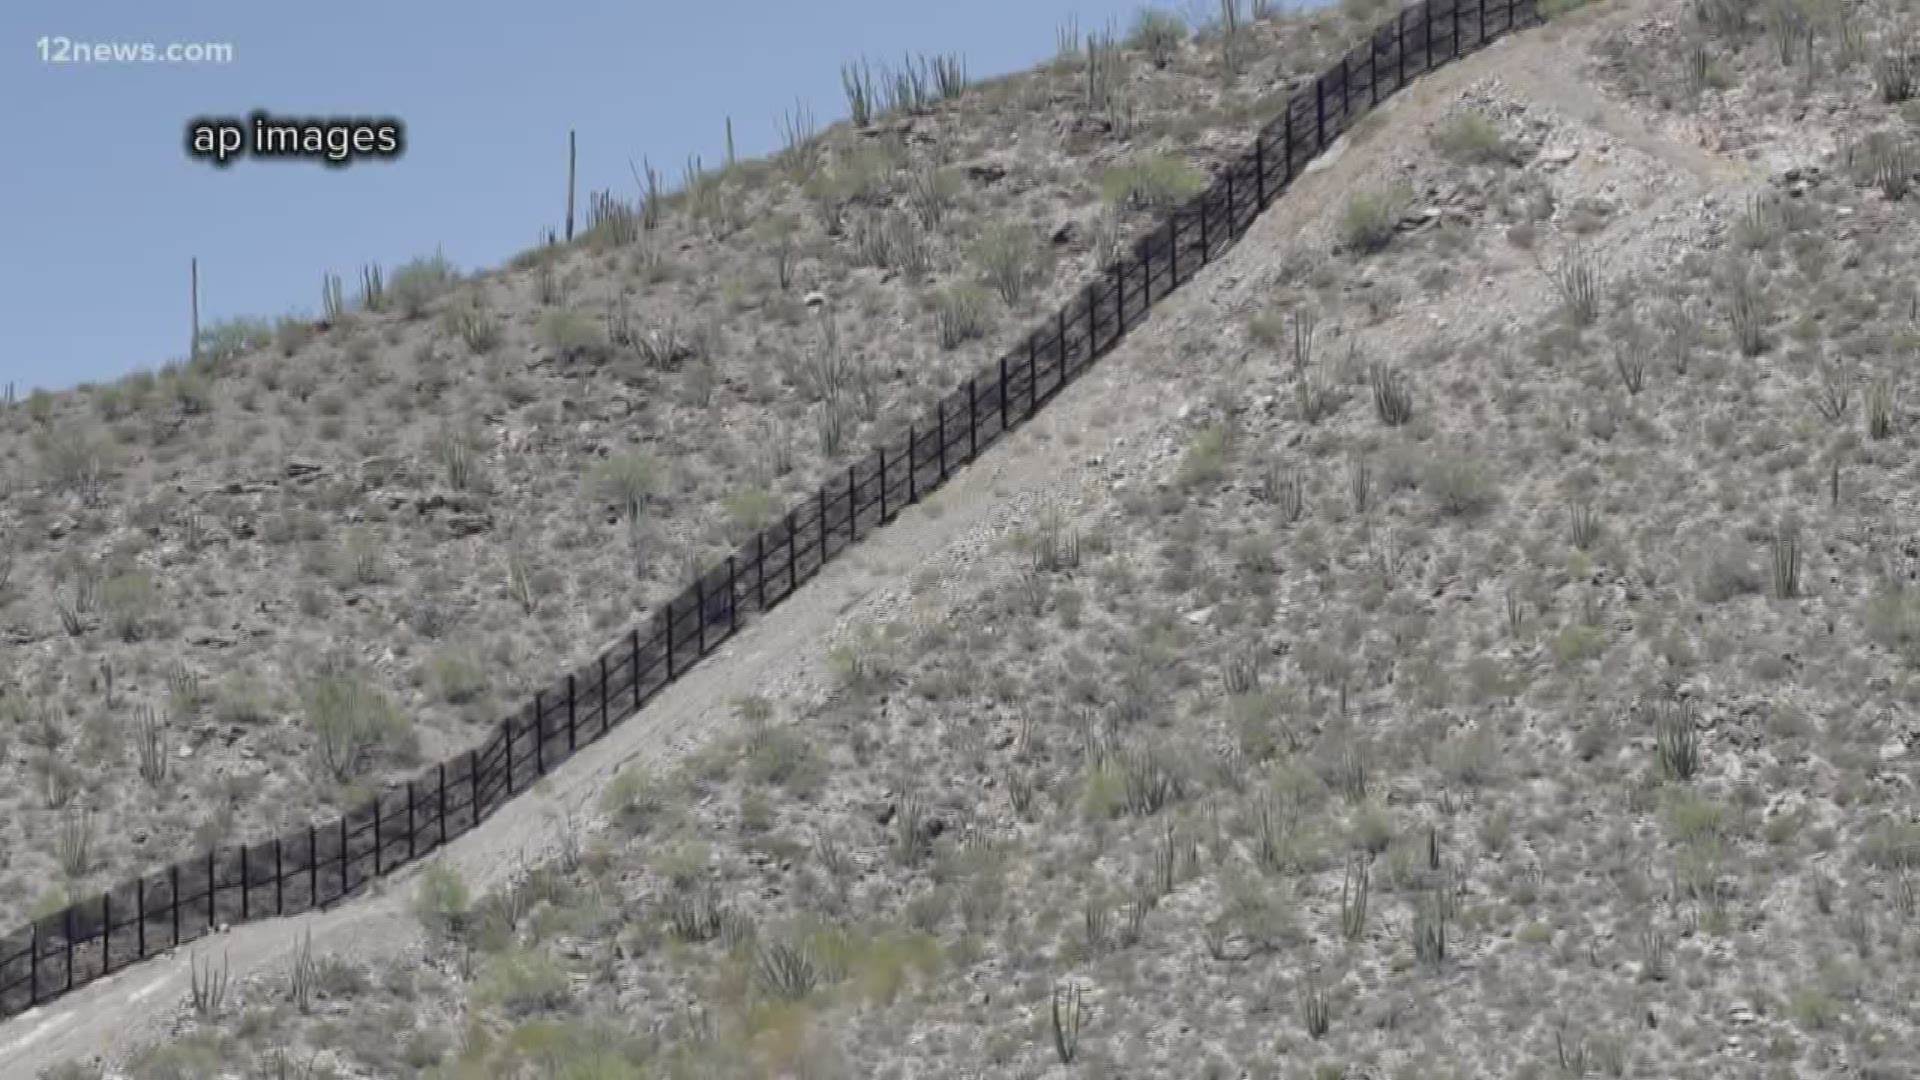 Border wall construction is picking up speed as the election approaches. We verified that explosives are being used on what's believed to be a sacred burial site.